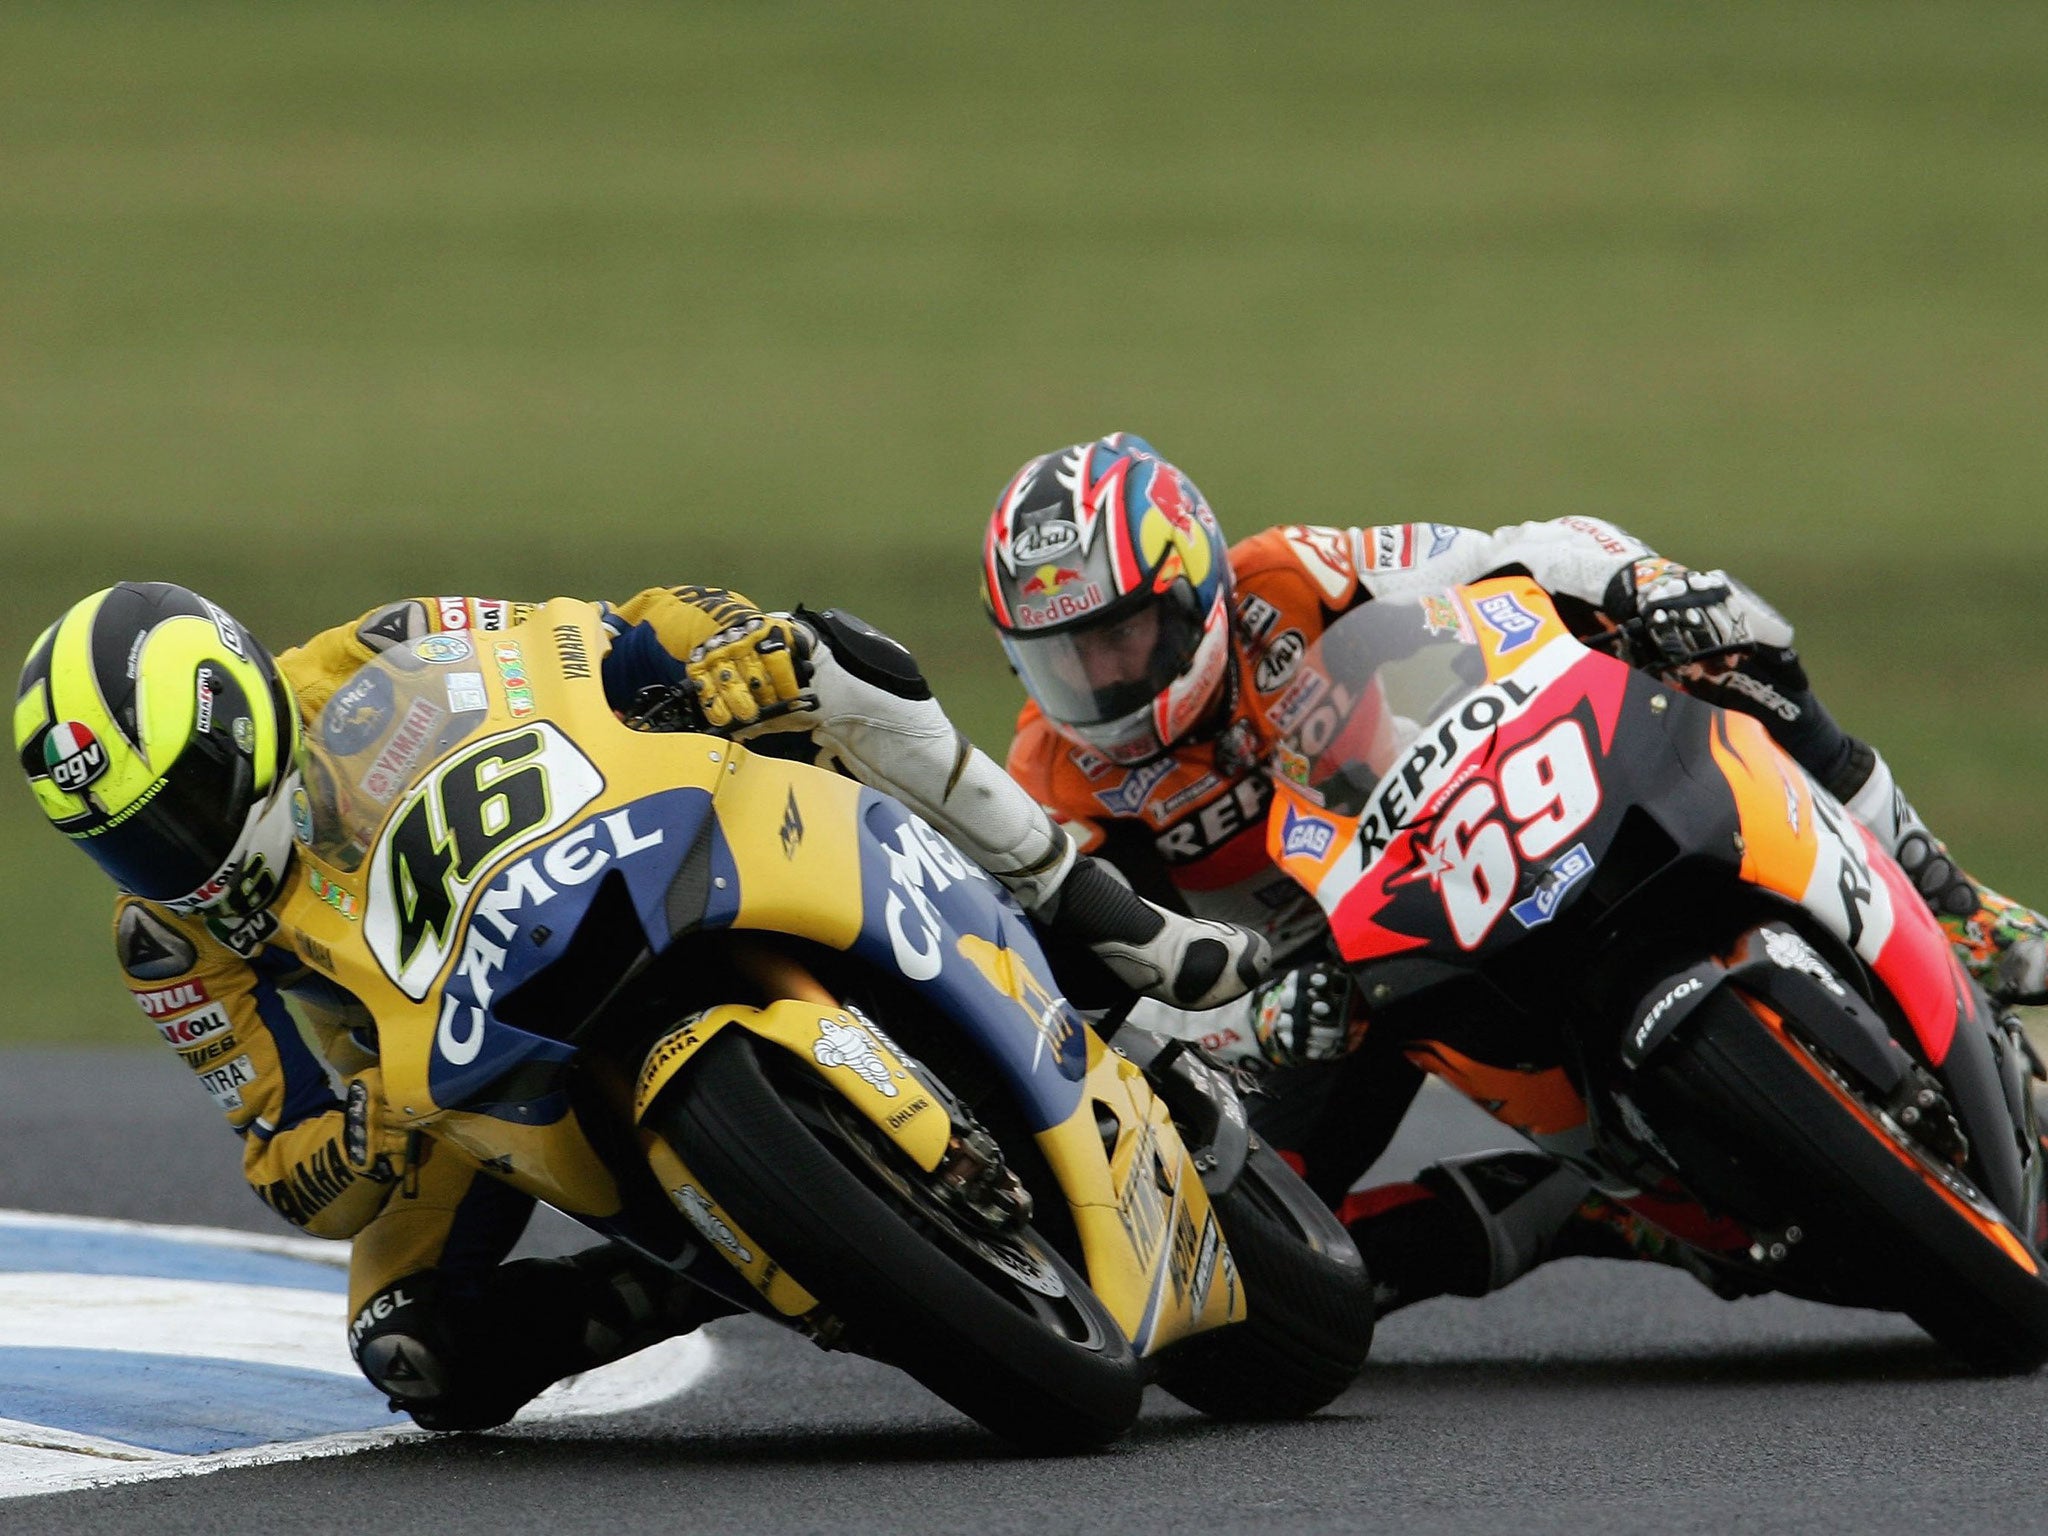 Hayden (right) enjoyed a thrilling battle with Rossi (left) in the 2006 MotoGP world championship